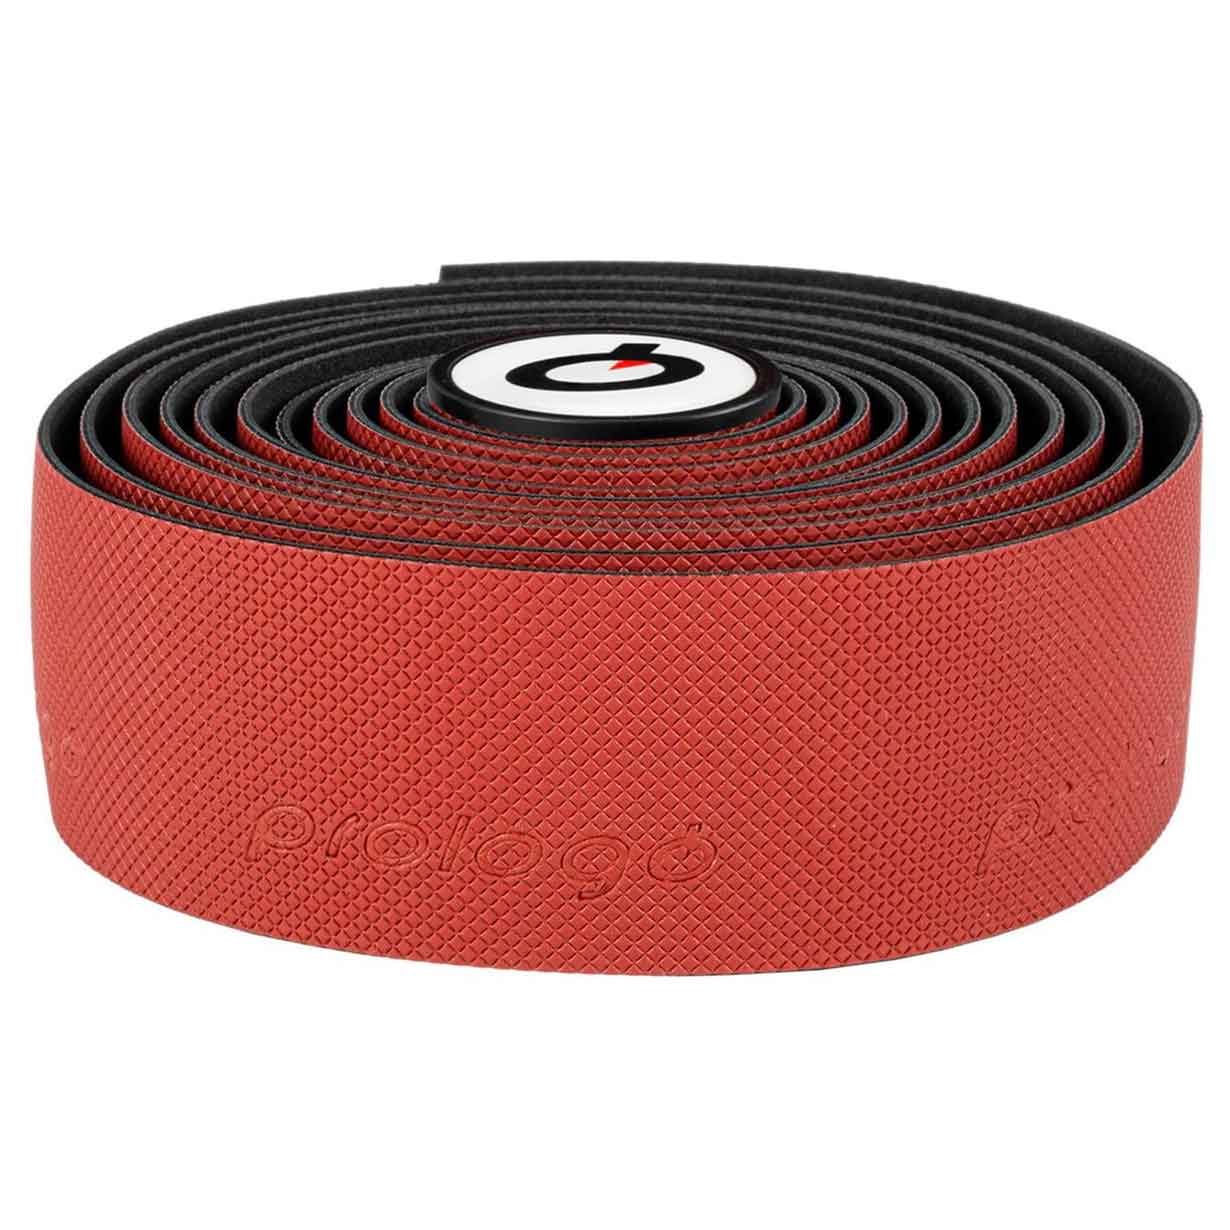 Picture of Prologo Onetouch Neutro Bar Tape - nature red